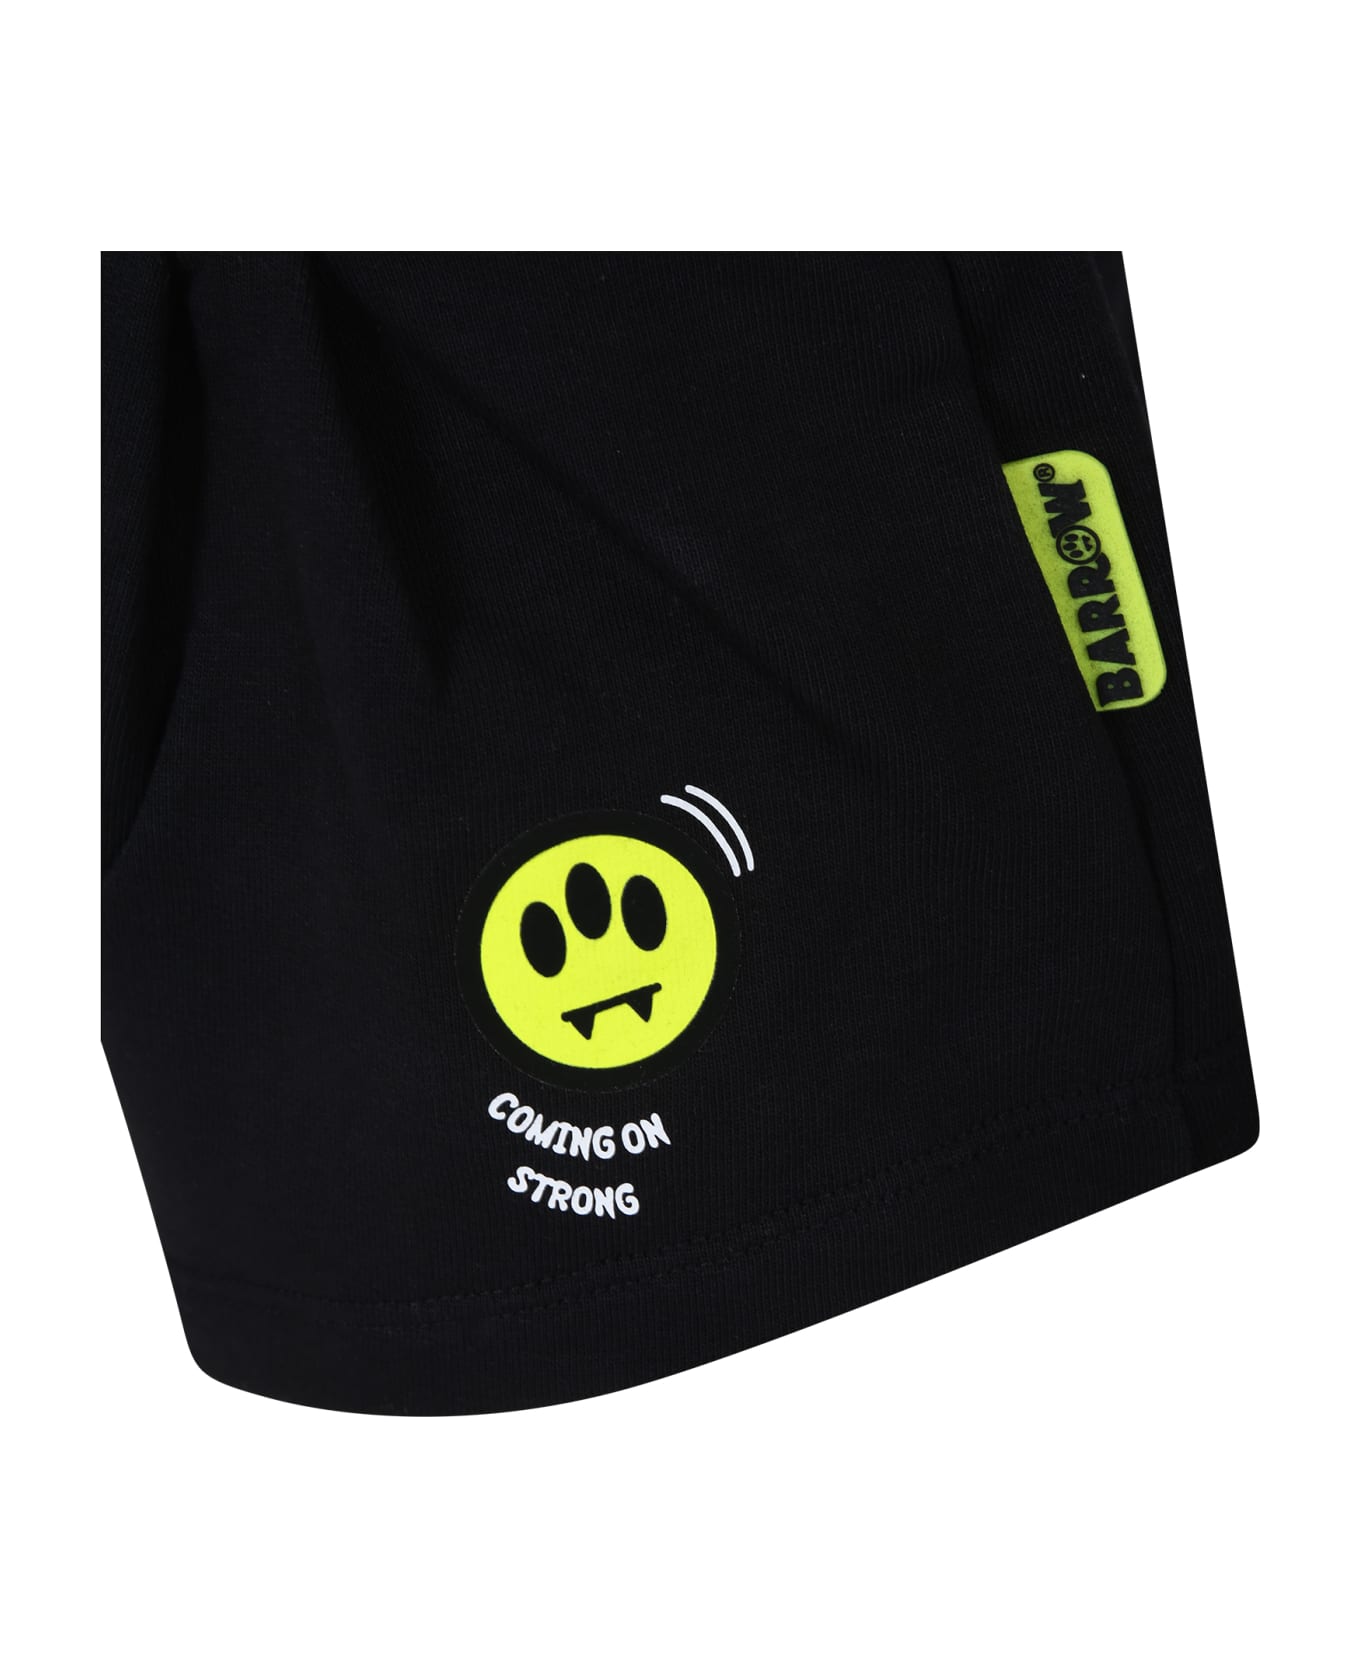 Barrow Black Shorts For Girl With Smiley Faces - Nero ボトムス